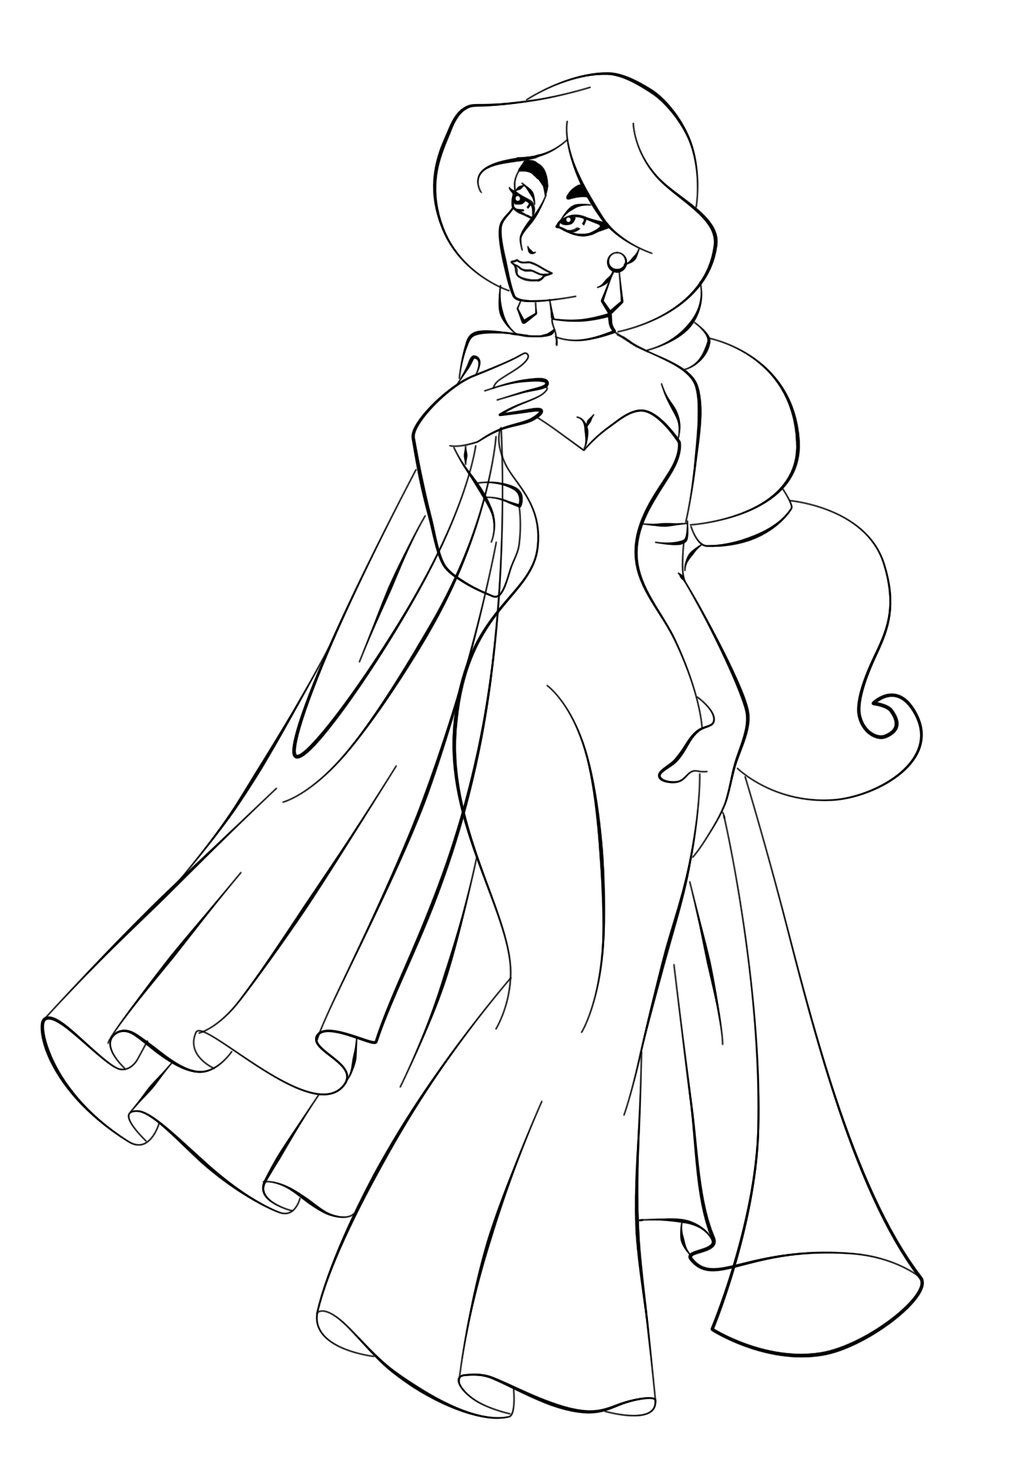 Jasmine In Wedding Dress Coloring Page